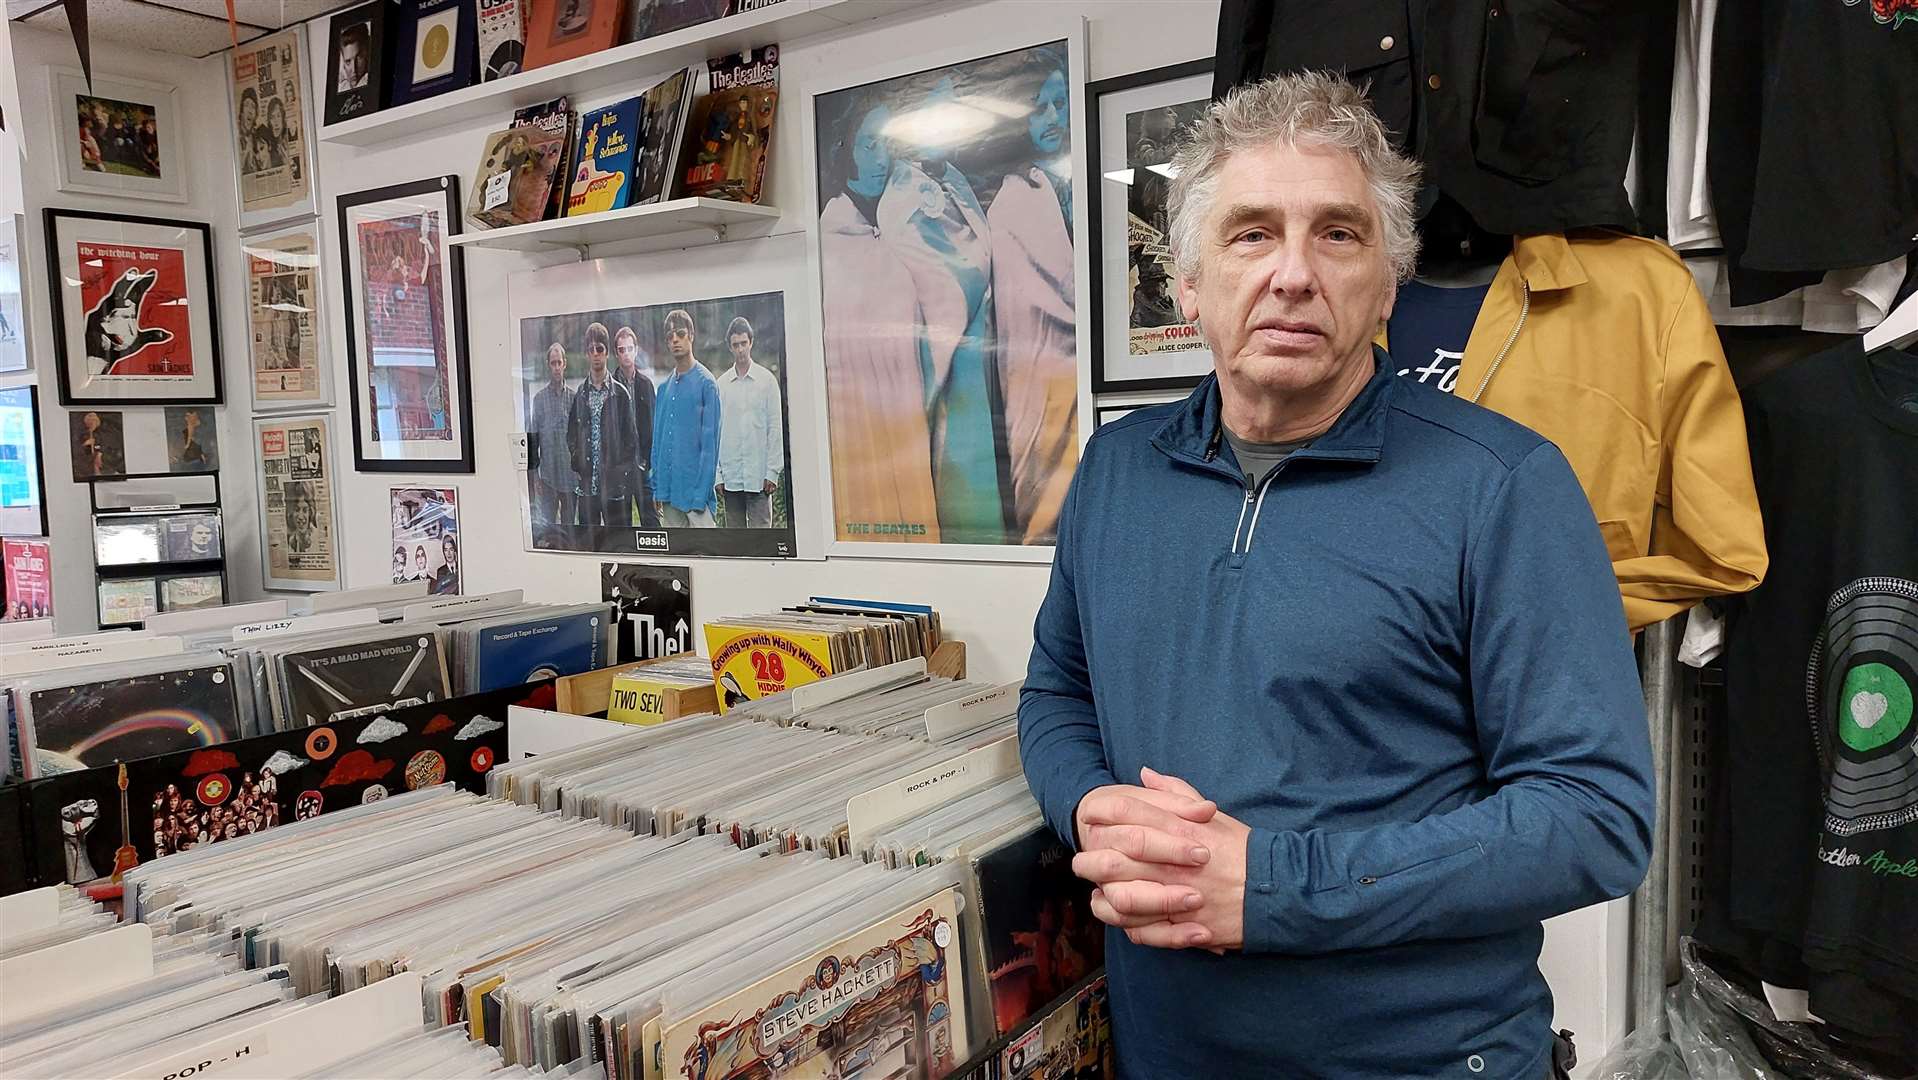 Vince Monticelli, owner of The Record Store in Park Mall